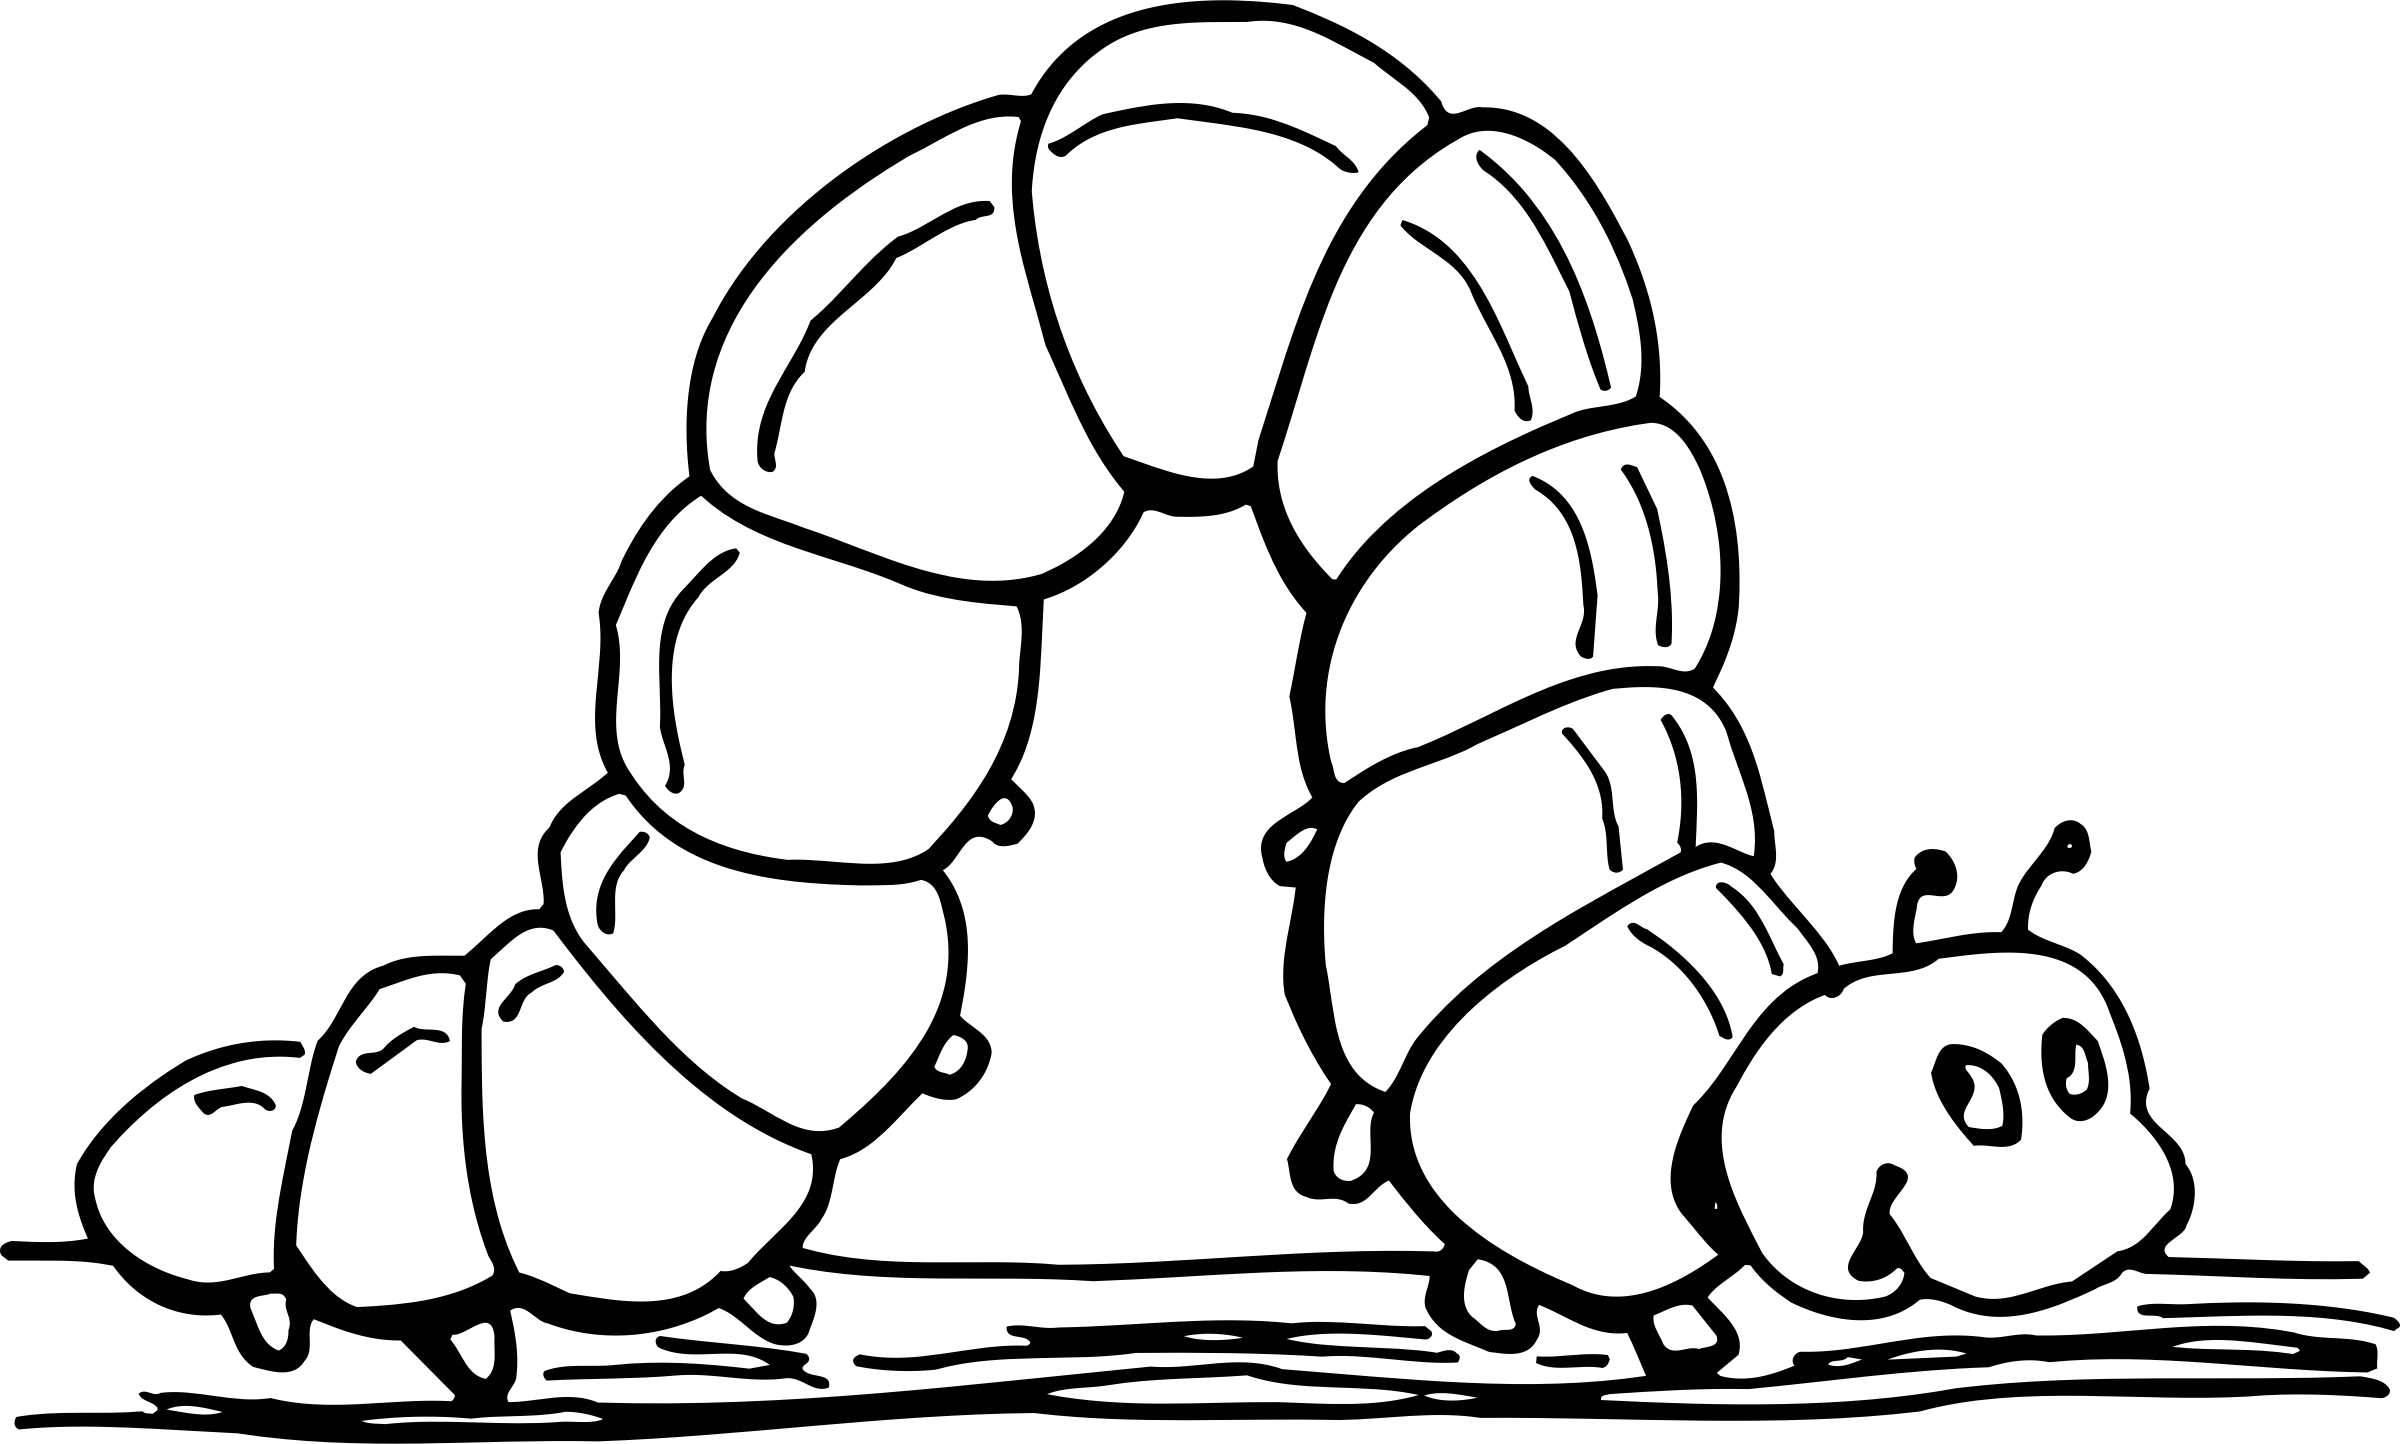 inchworm clipart black and white - Clip Art Library